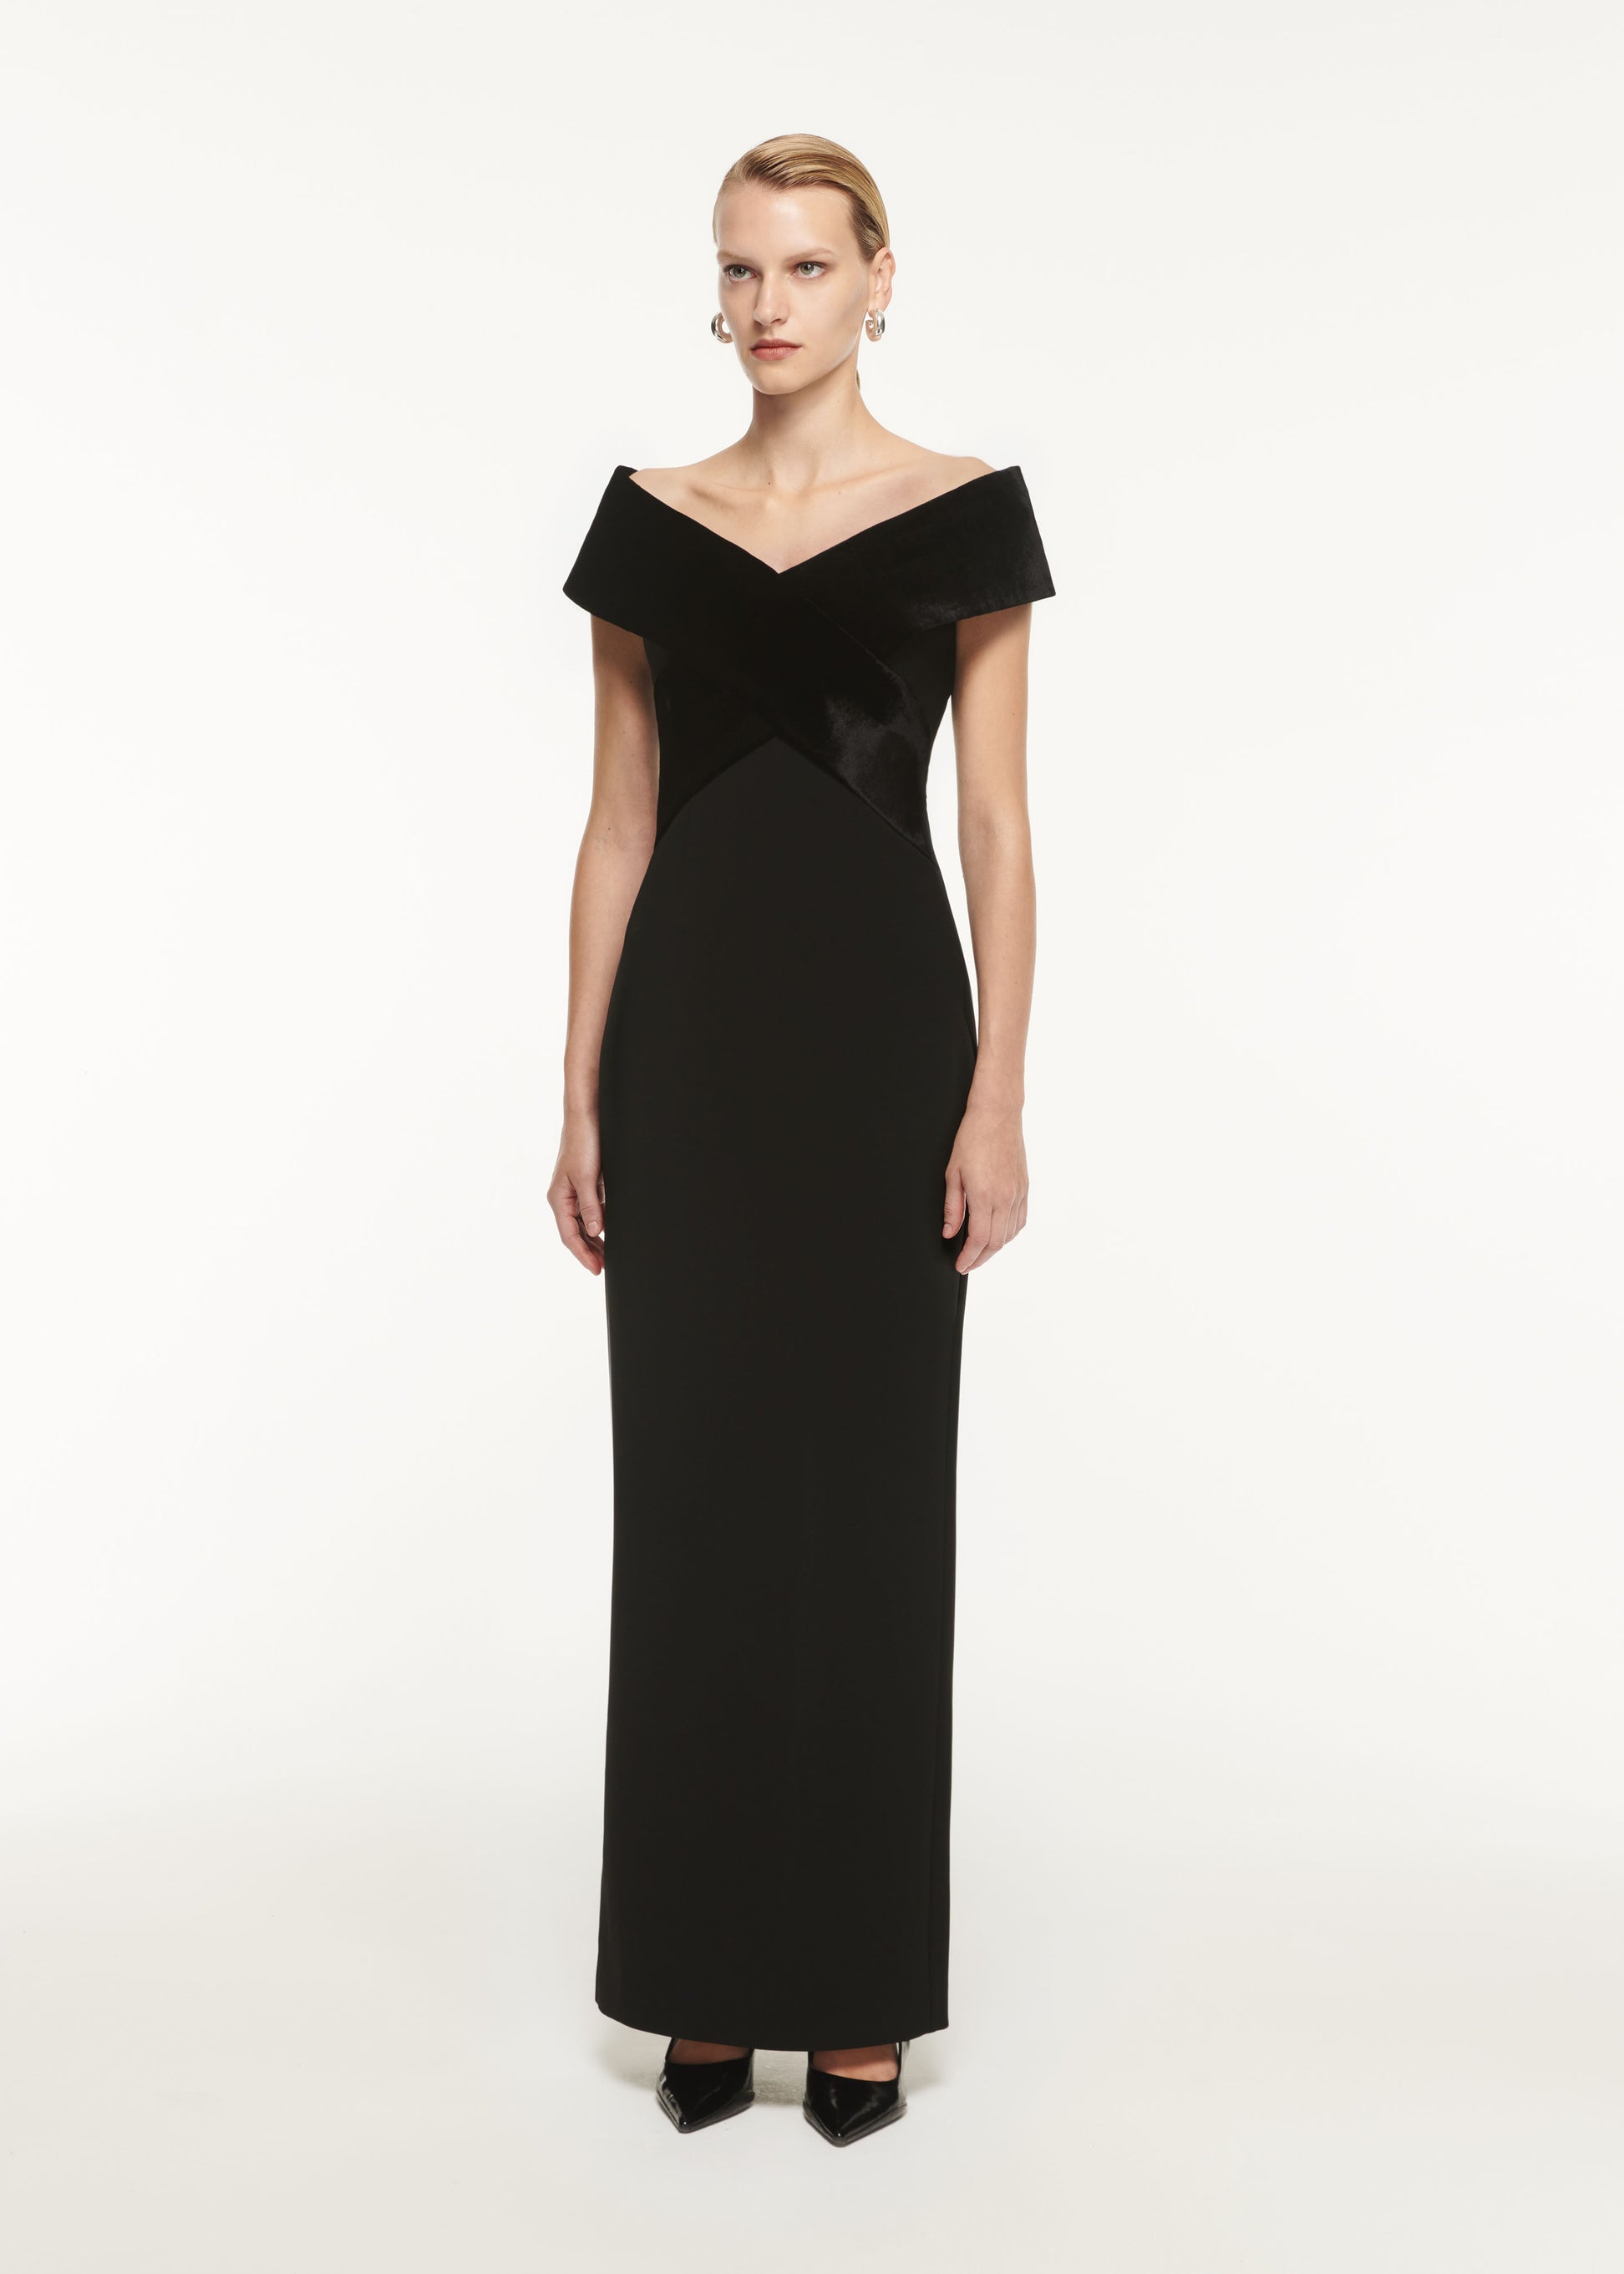 A woman wearing the Off The Shoulder Stretch Cady Maxi Dress Black